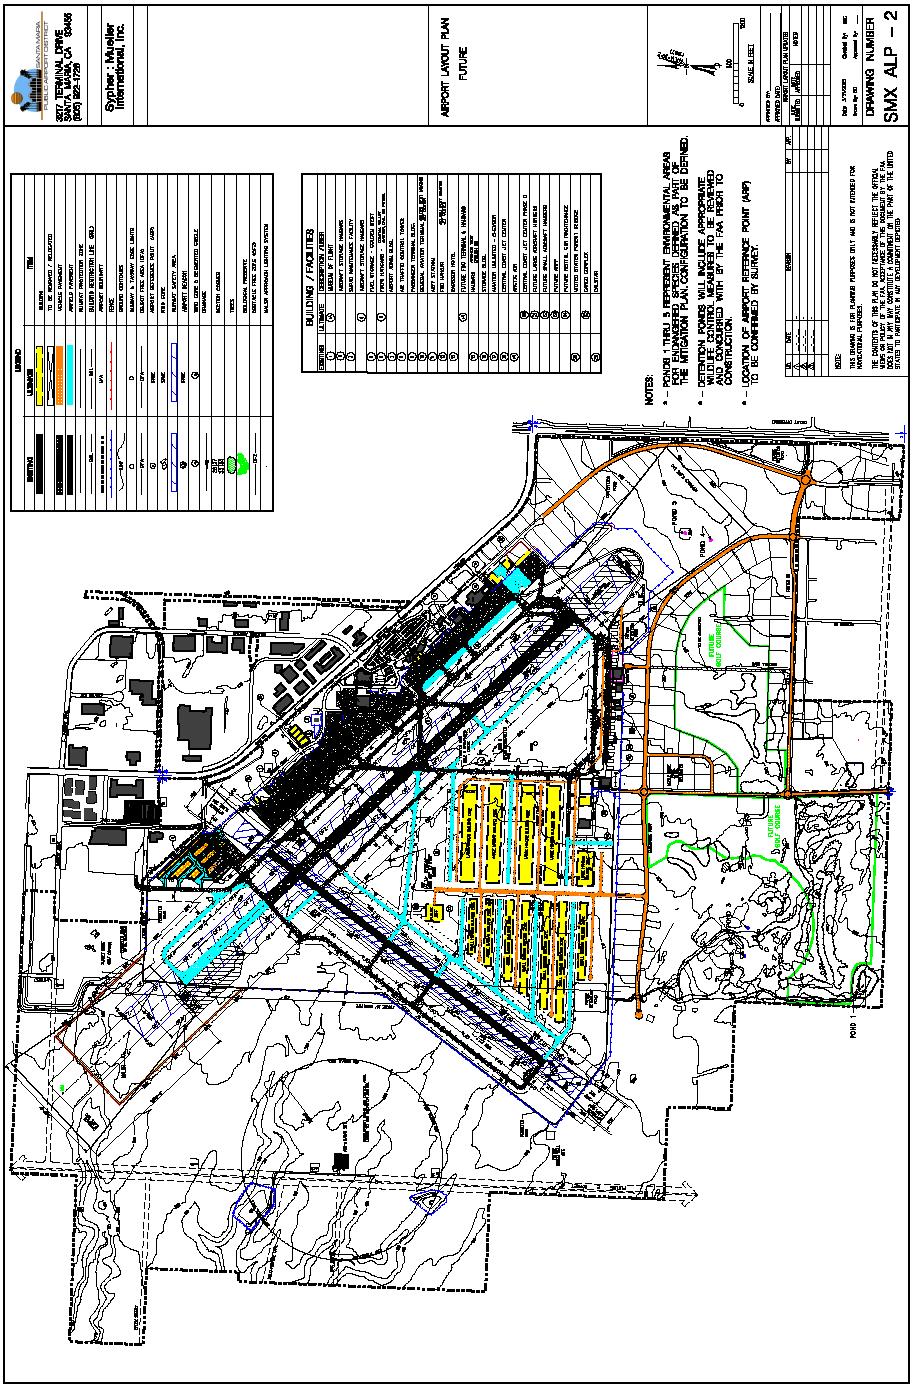 Figure 10-1: Airport Layout Plan Drawing Source: Santa Maria Airport (SMX), prepared by Sypher:Mueller.